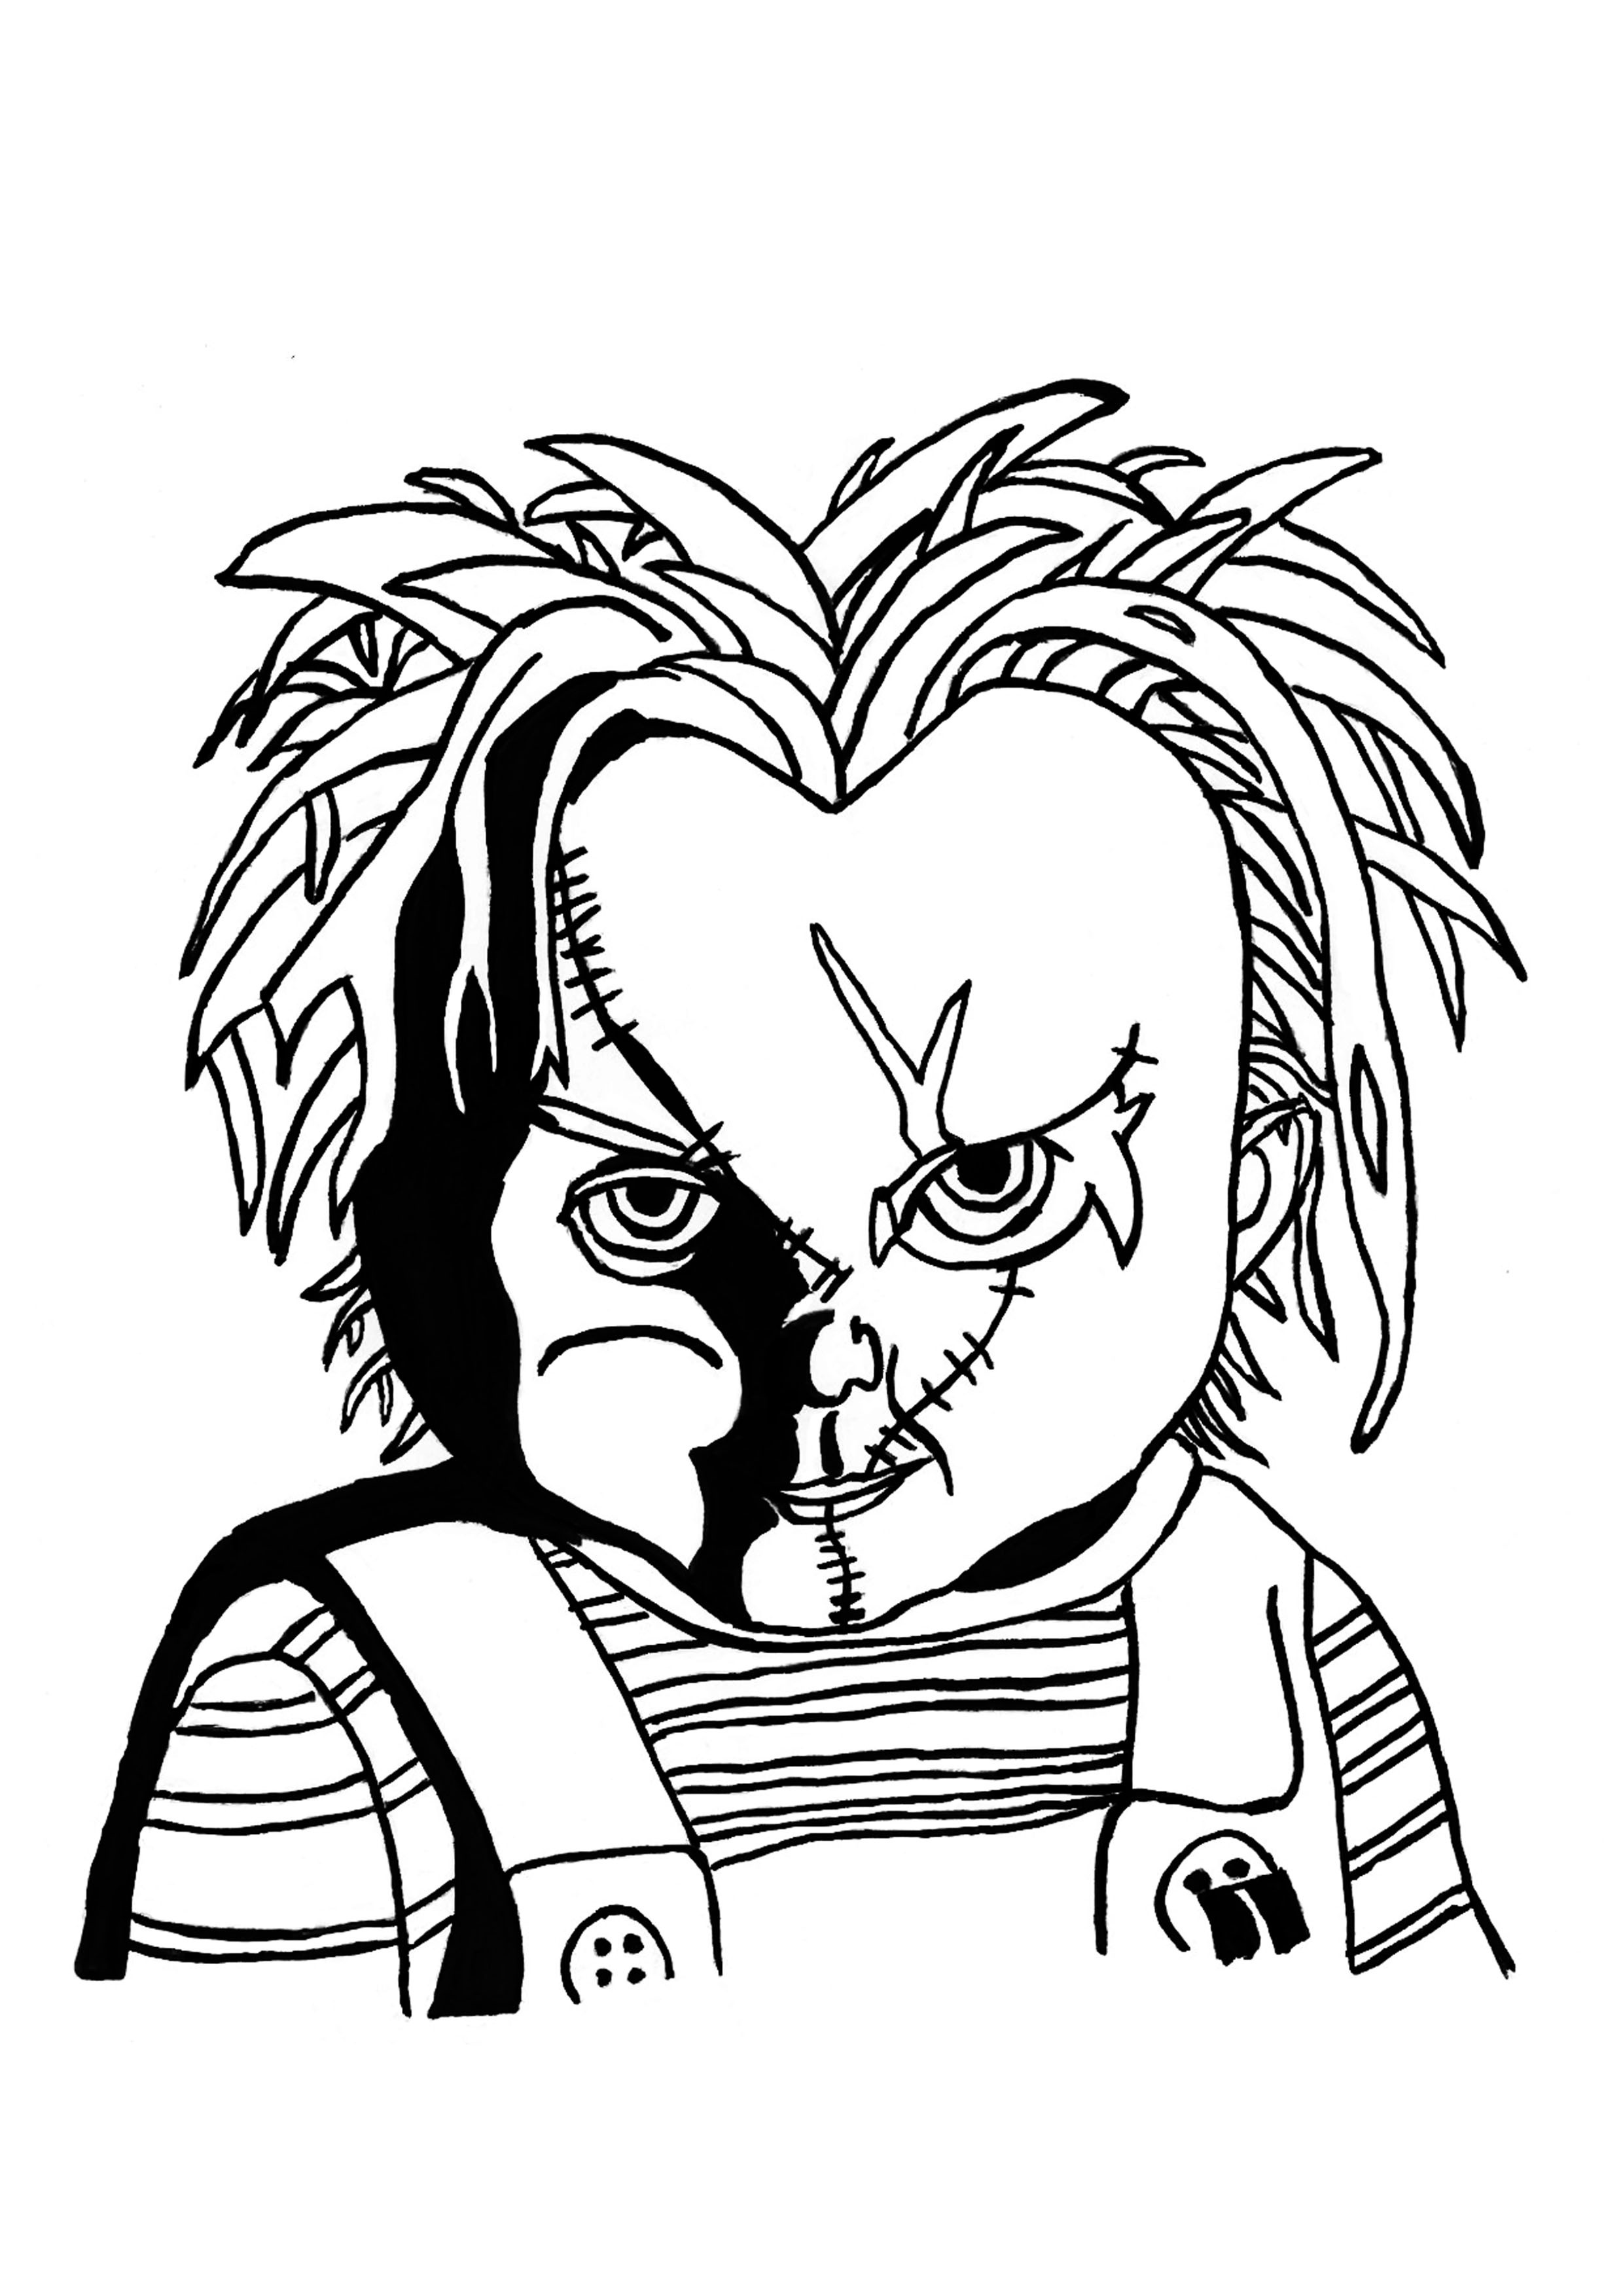 image=coloriages halloween coloriage poupee chucky halloween 1